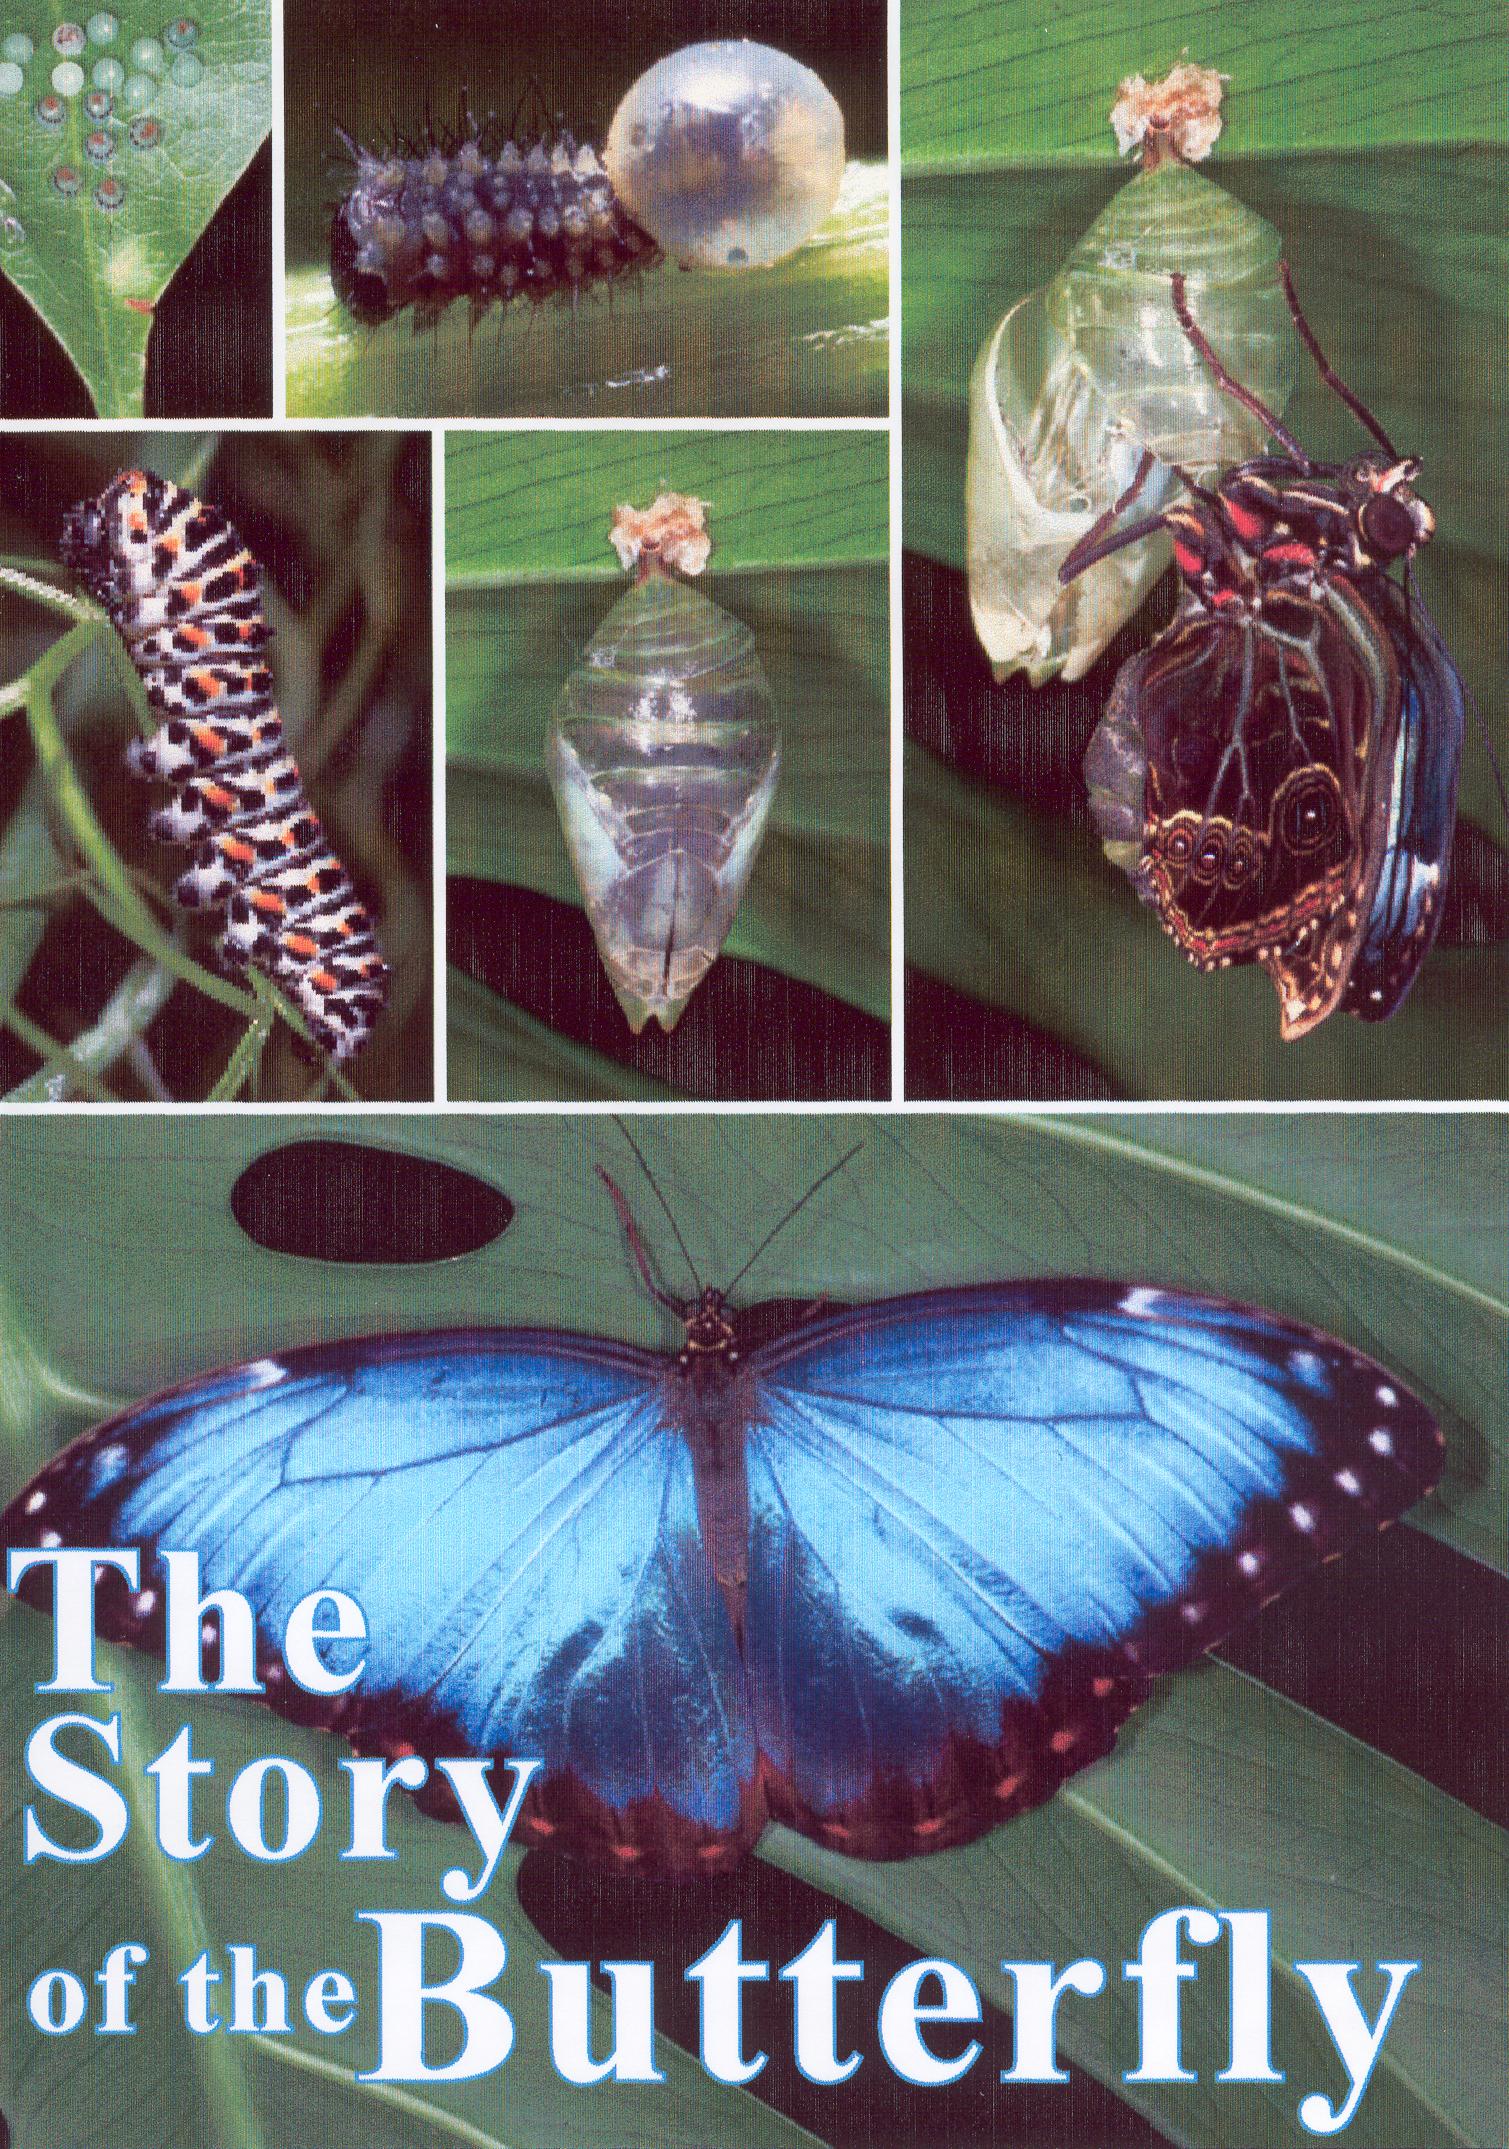 The Butterfly by Victoria Vale